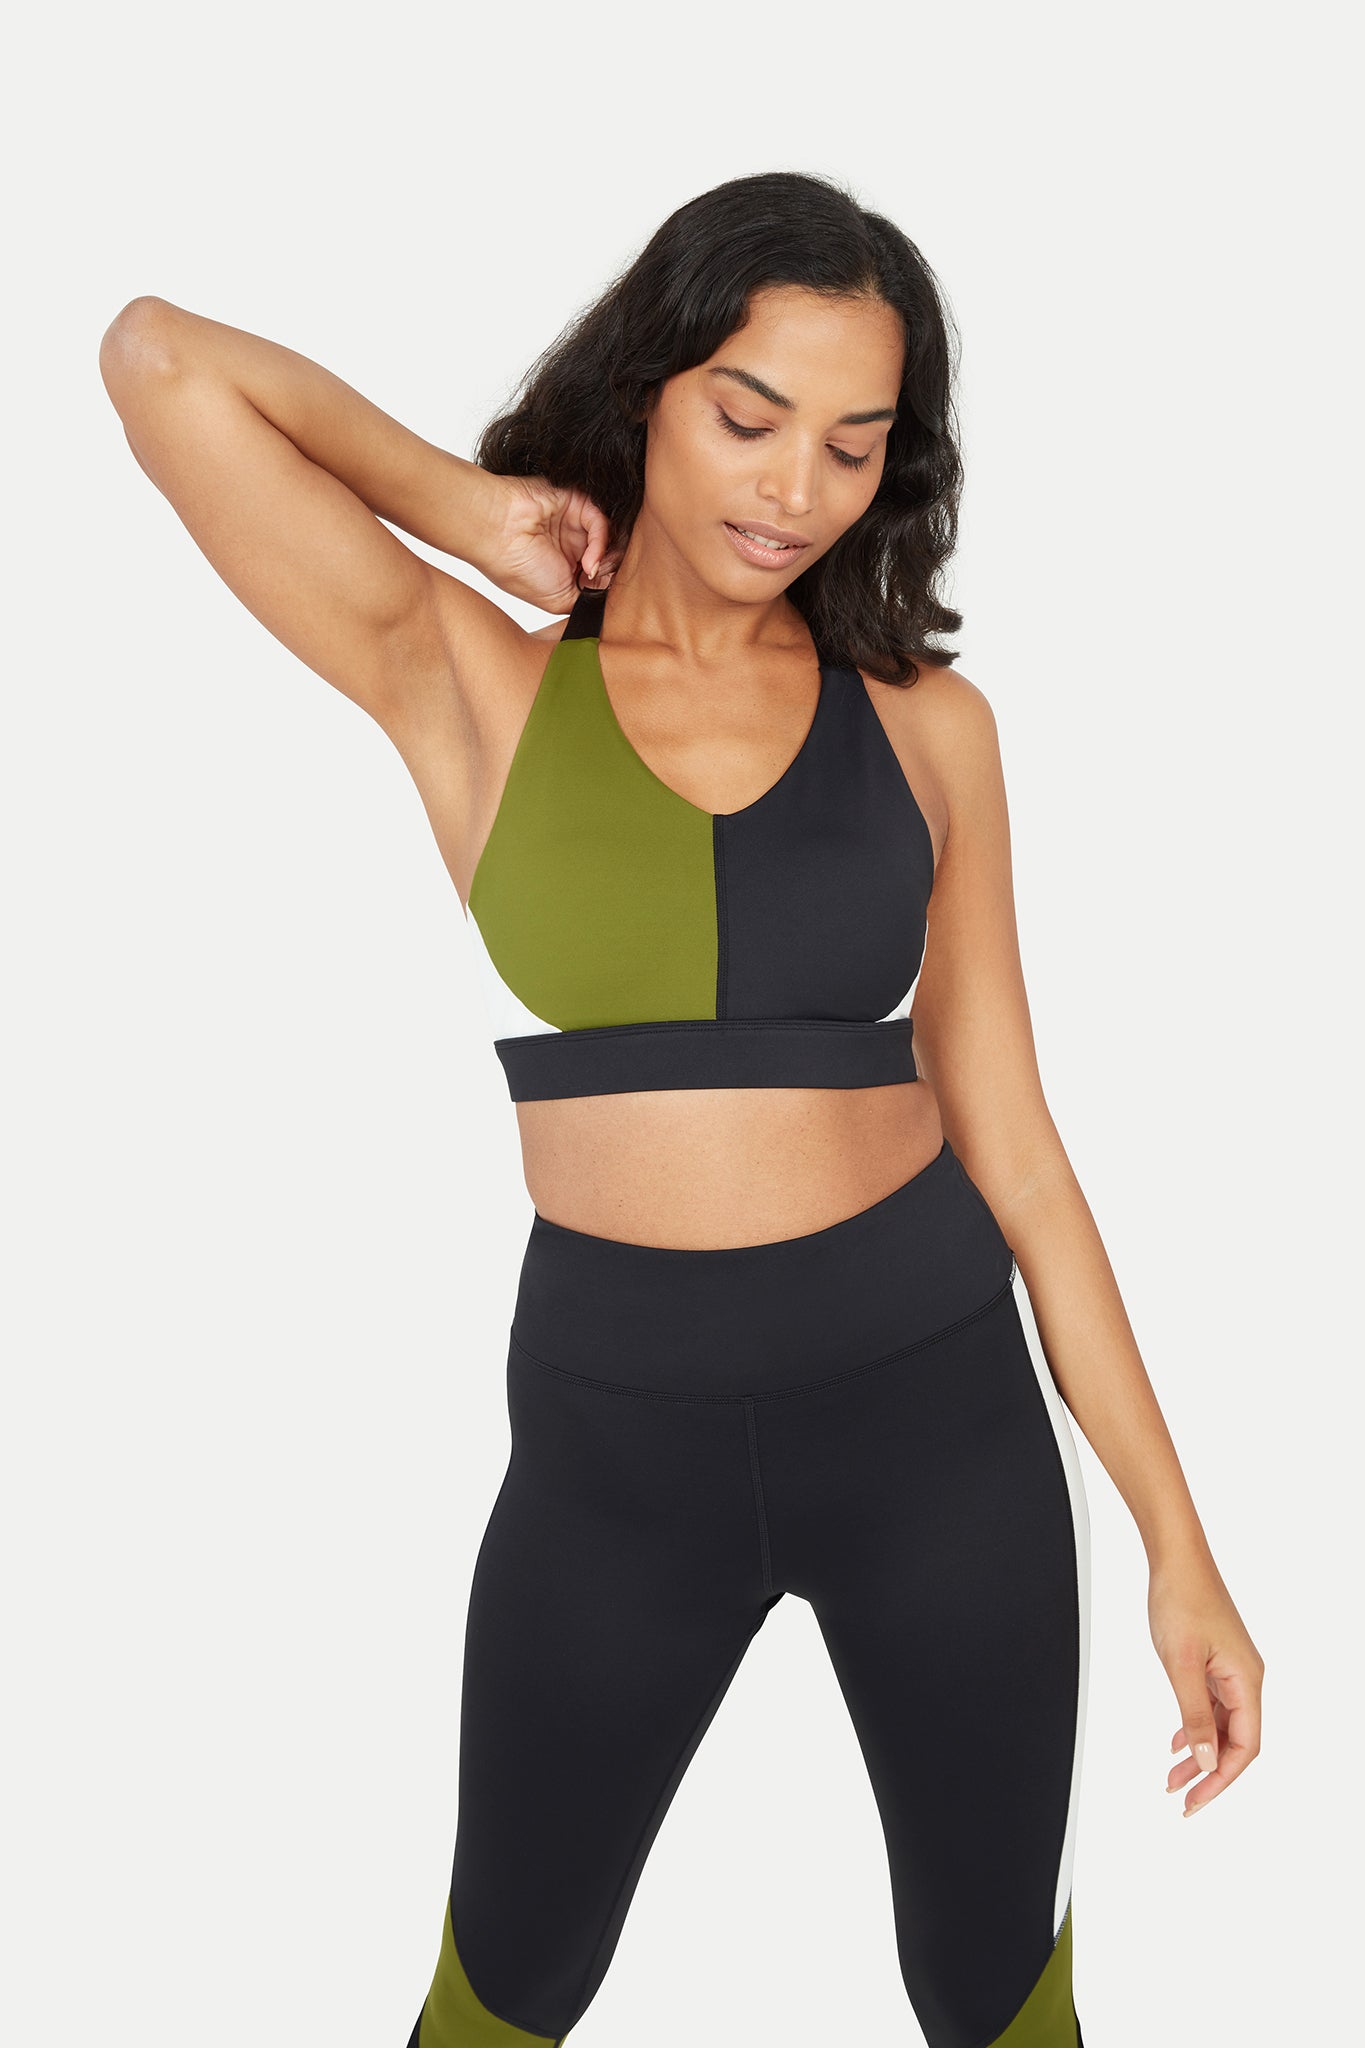 Pockito Bra  Perfect bra, Supportive sports bras, Things that bounce